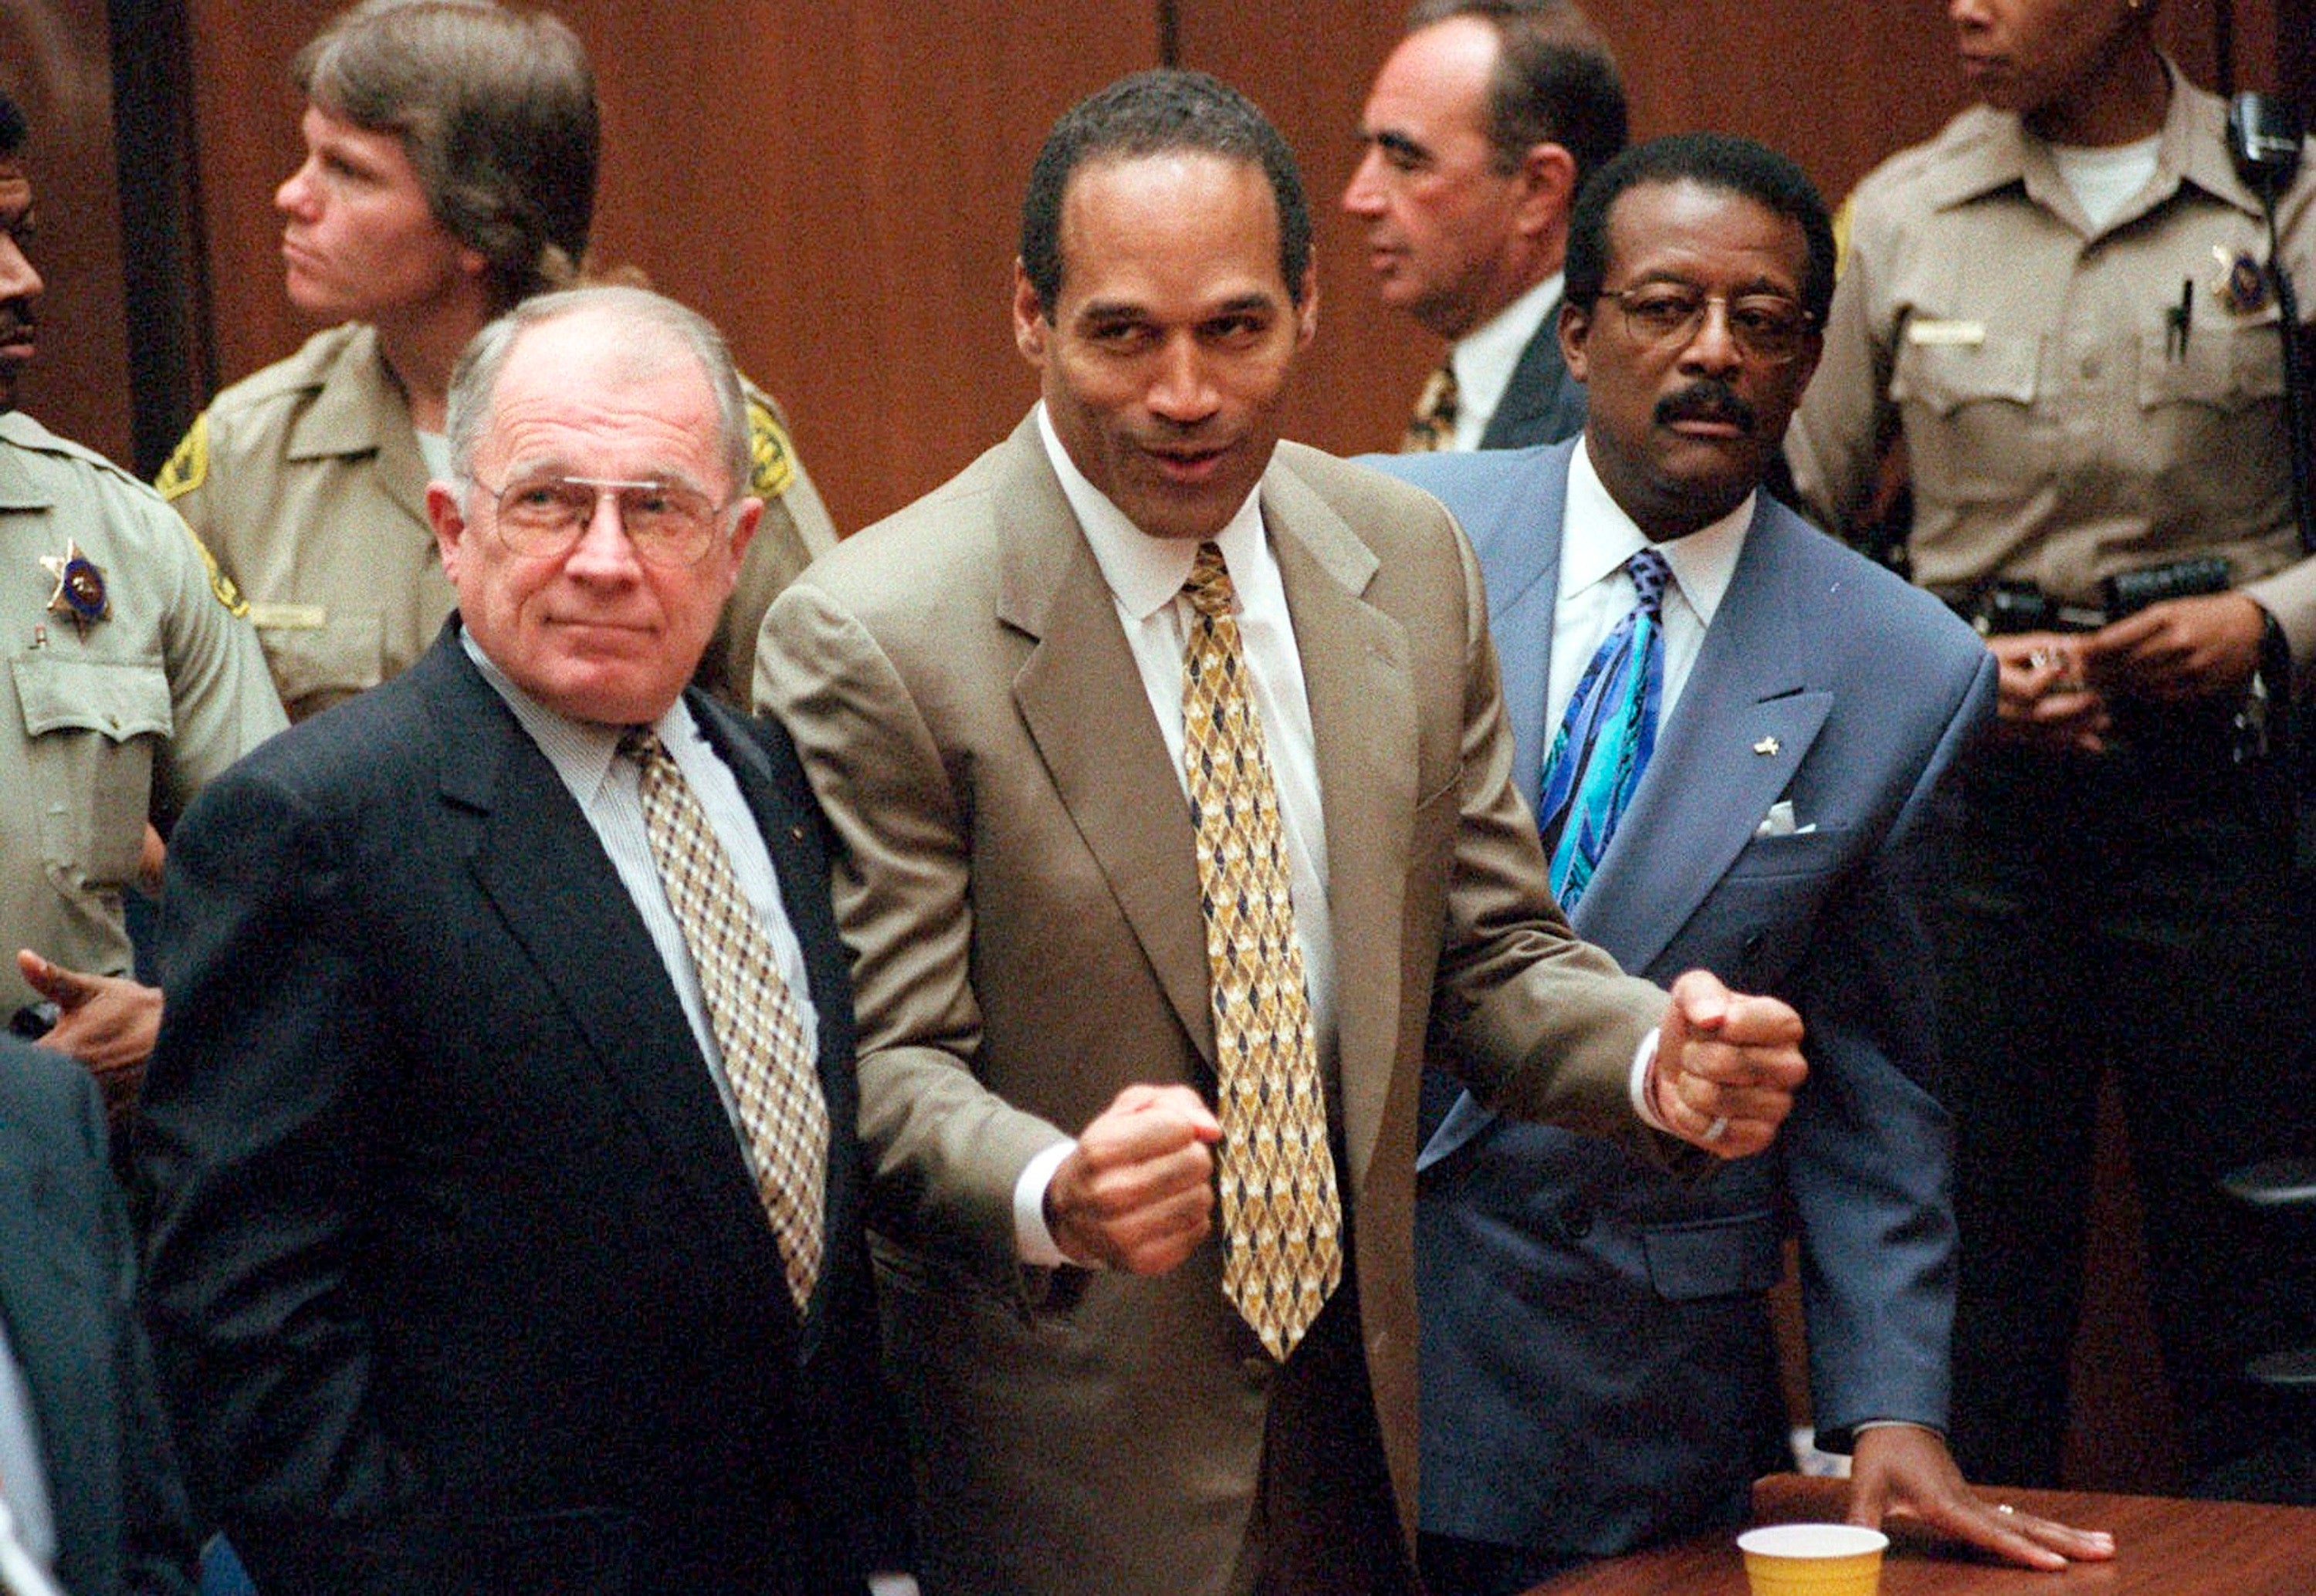 <p>FILE - In this Oct. 3, 1995, file photo, O.J. Simpson reacts as he is found not guilty in the death of his ex-wife Nicole Brown Simpson and her friend Ron Goldman in Los Angeles. Defense attorneys F. Lee Bailey, left, and Johnnie L. Cochran Jr. stand with him. Cochran, Simpson's flamboyant lead attorney, died of brain cancer in 2005 at 68. His refrain to jurors that "If it doesn't fit, you must acquit" sought to underscore that the bloody gloves found at Simpson’s home and the crime scene were too small for football legend when he tried them on in court. (Myung J. Chun/Los Angeles Daily News via AP, Pool, File)</p>